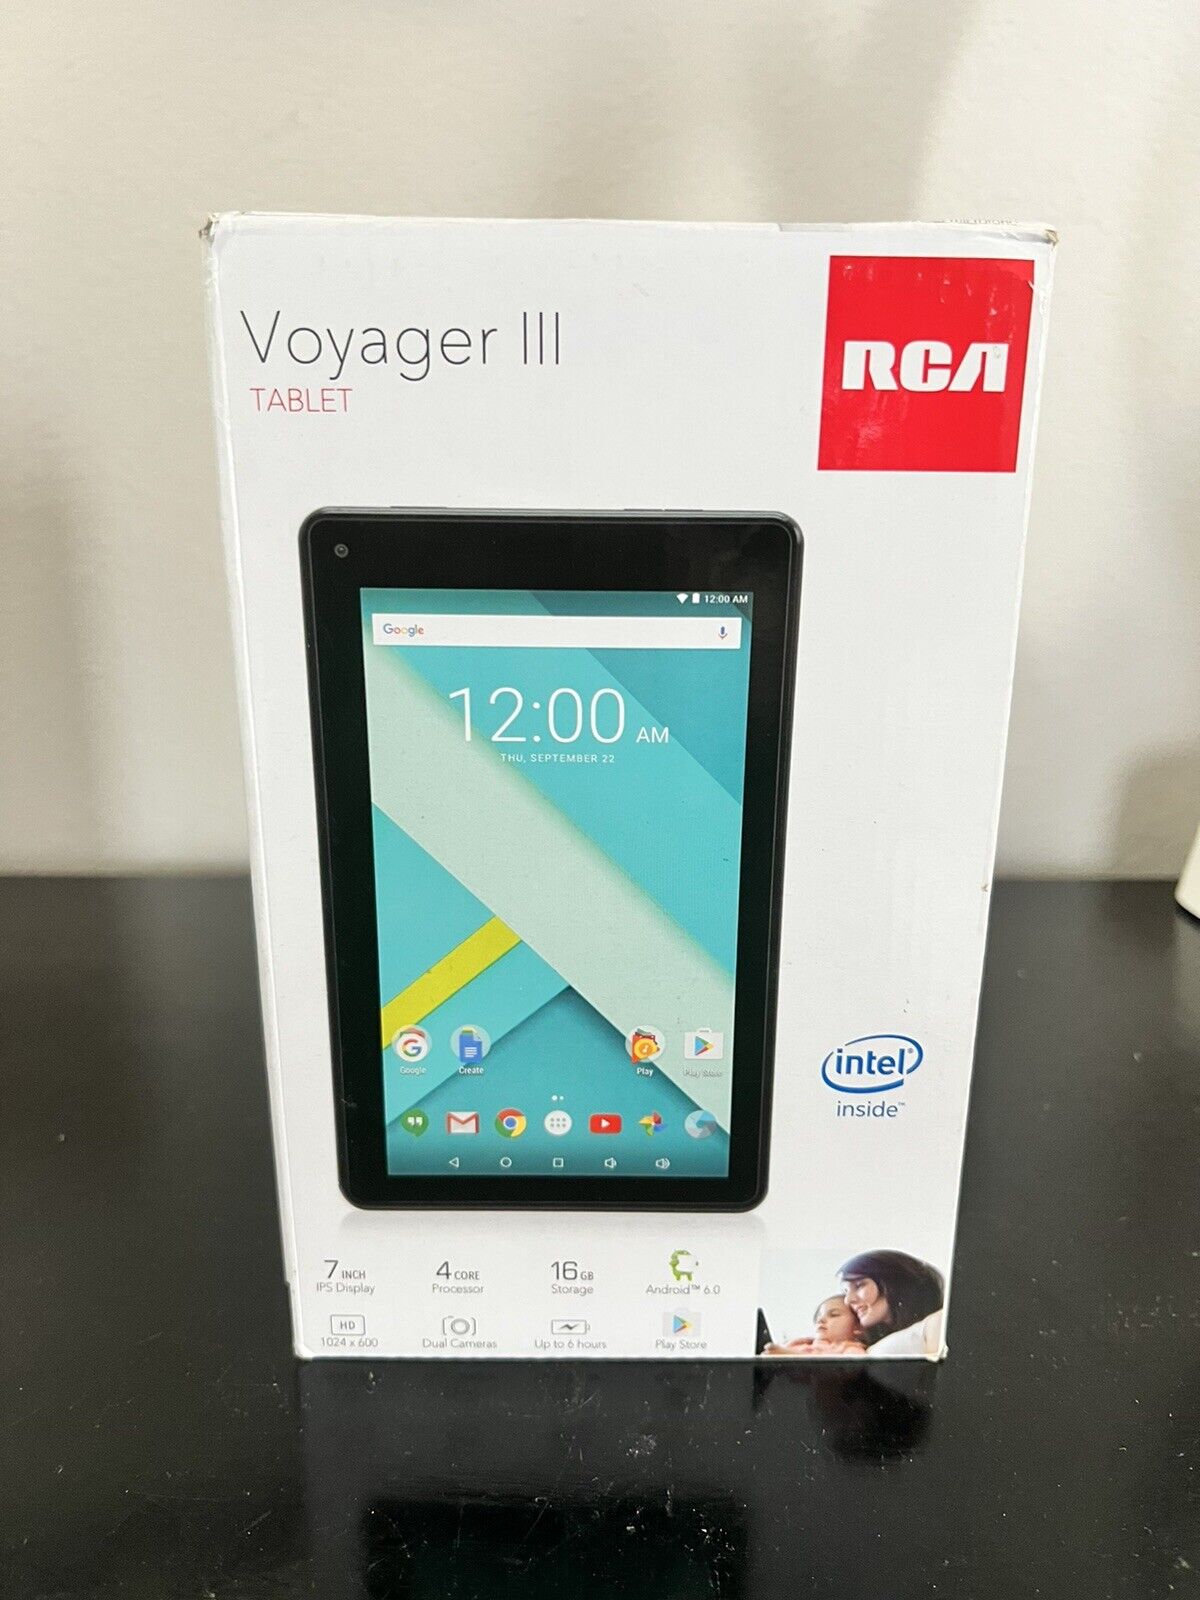 RCA Voyager 3 III Tablet New 4 Core Processor Google Play HD Dual Cameras 16GB